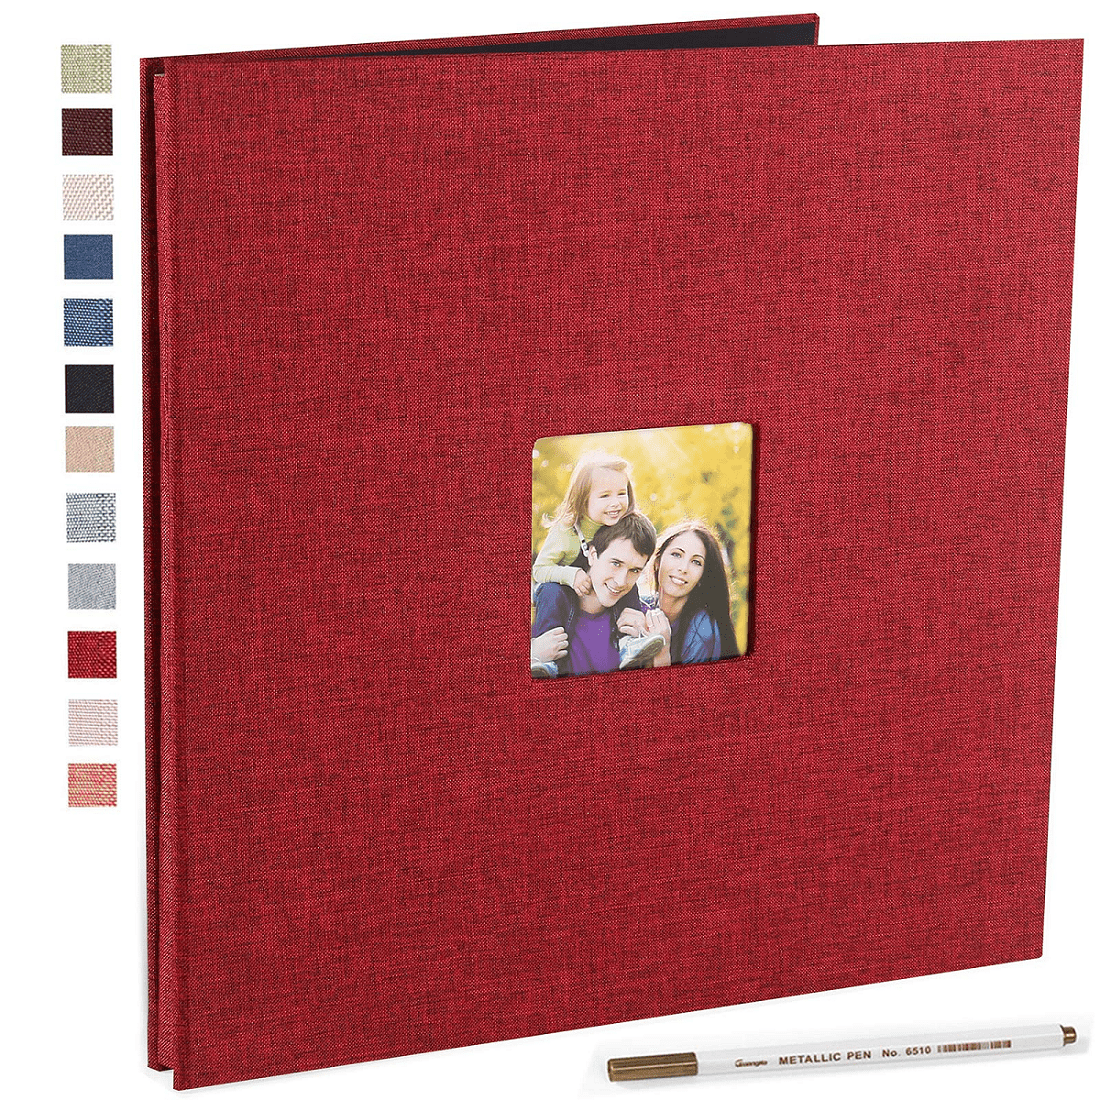 Vienrose Large Photo Album Self Adhesive for 4x6 8x10 Pictures Linen  Scrapbook Album DIY 40 Blank Pages with A Metallic Pen